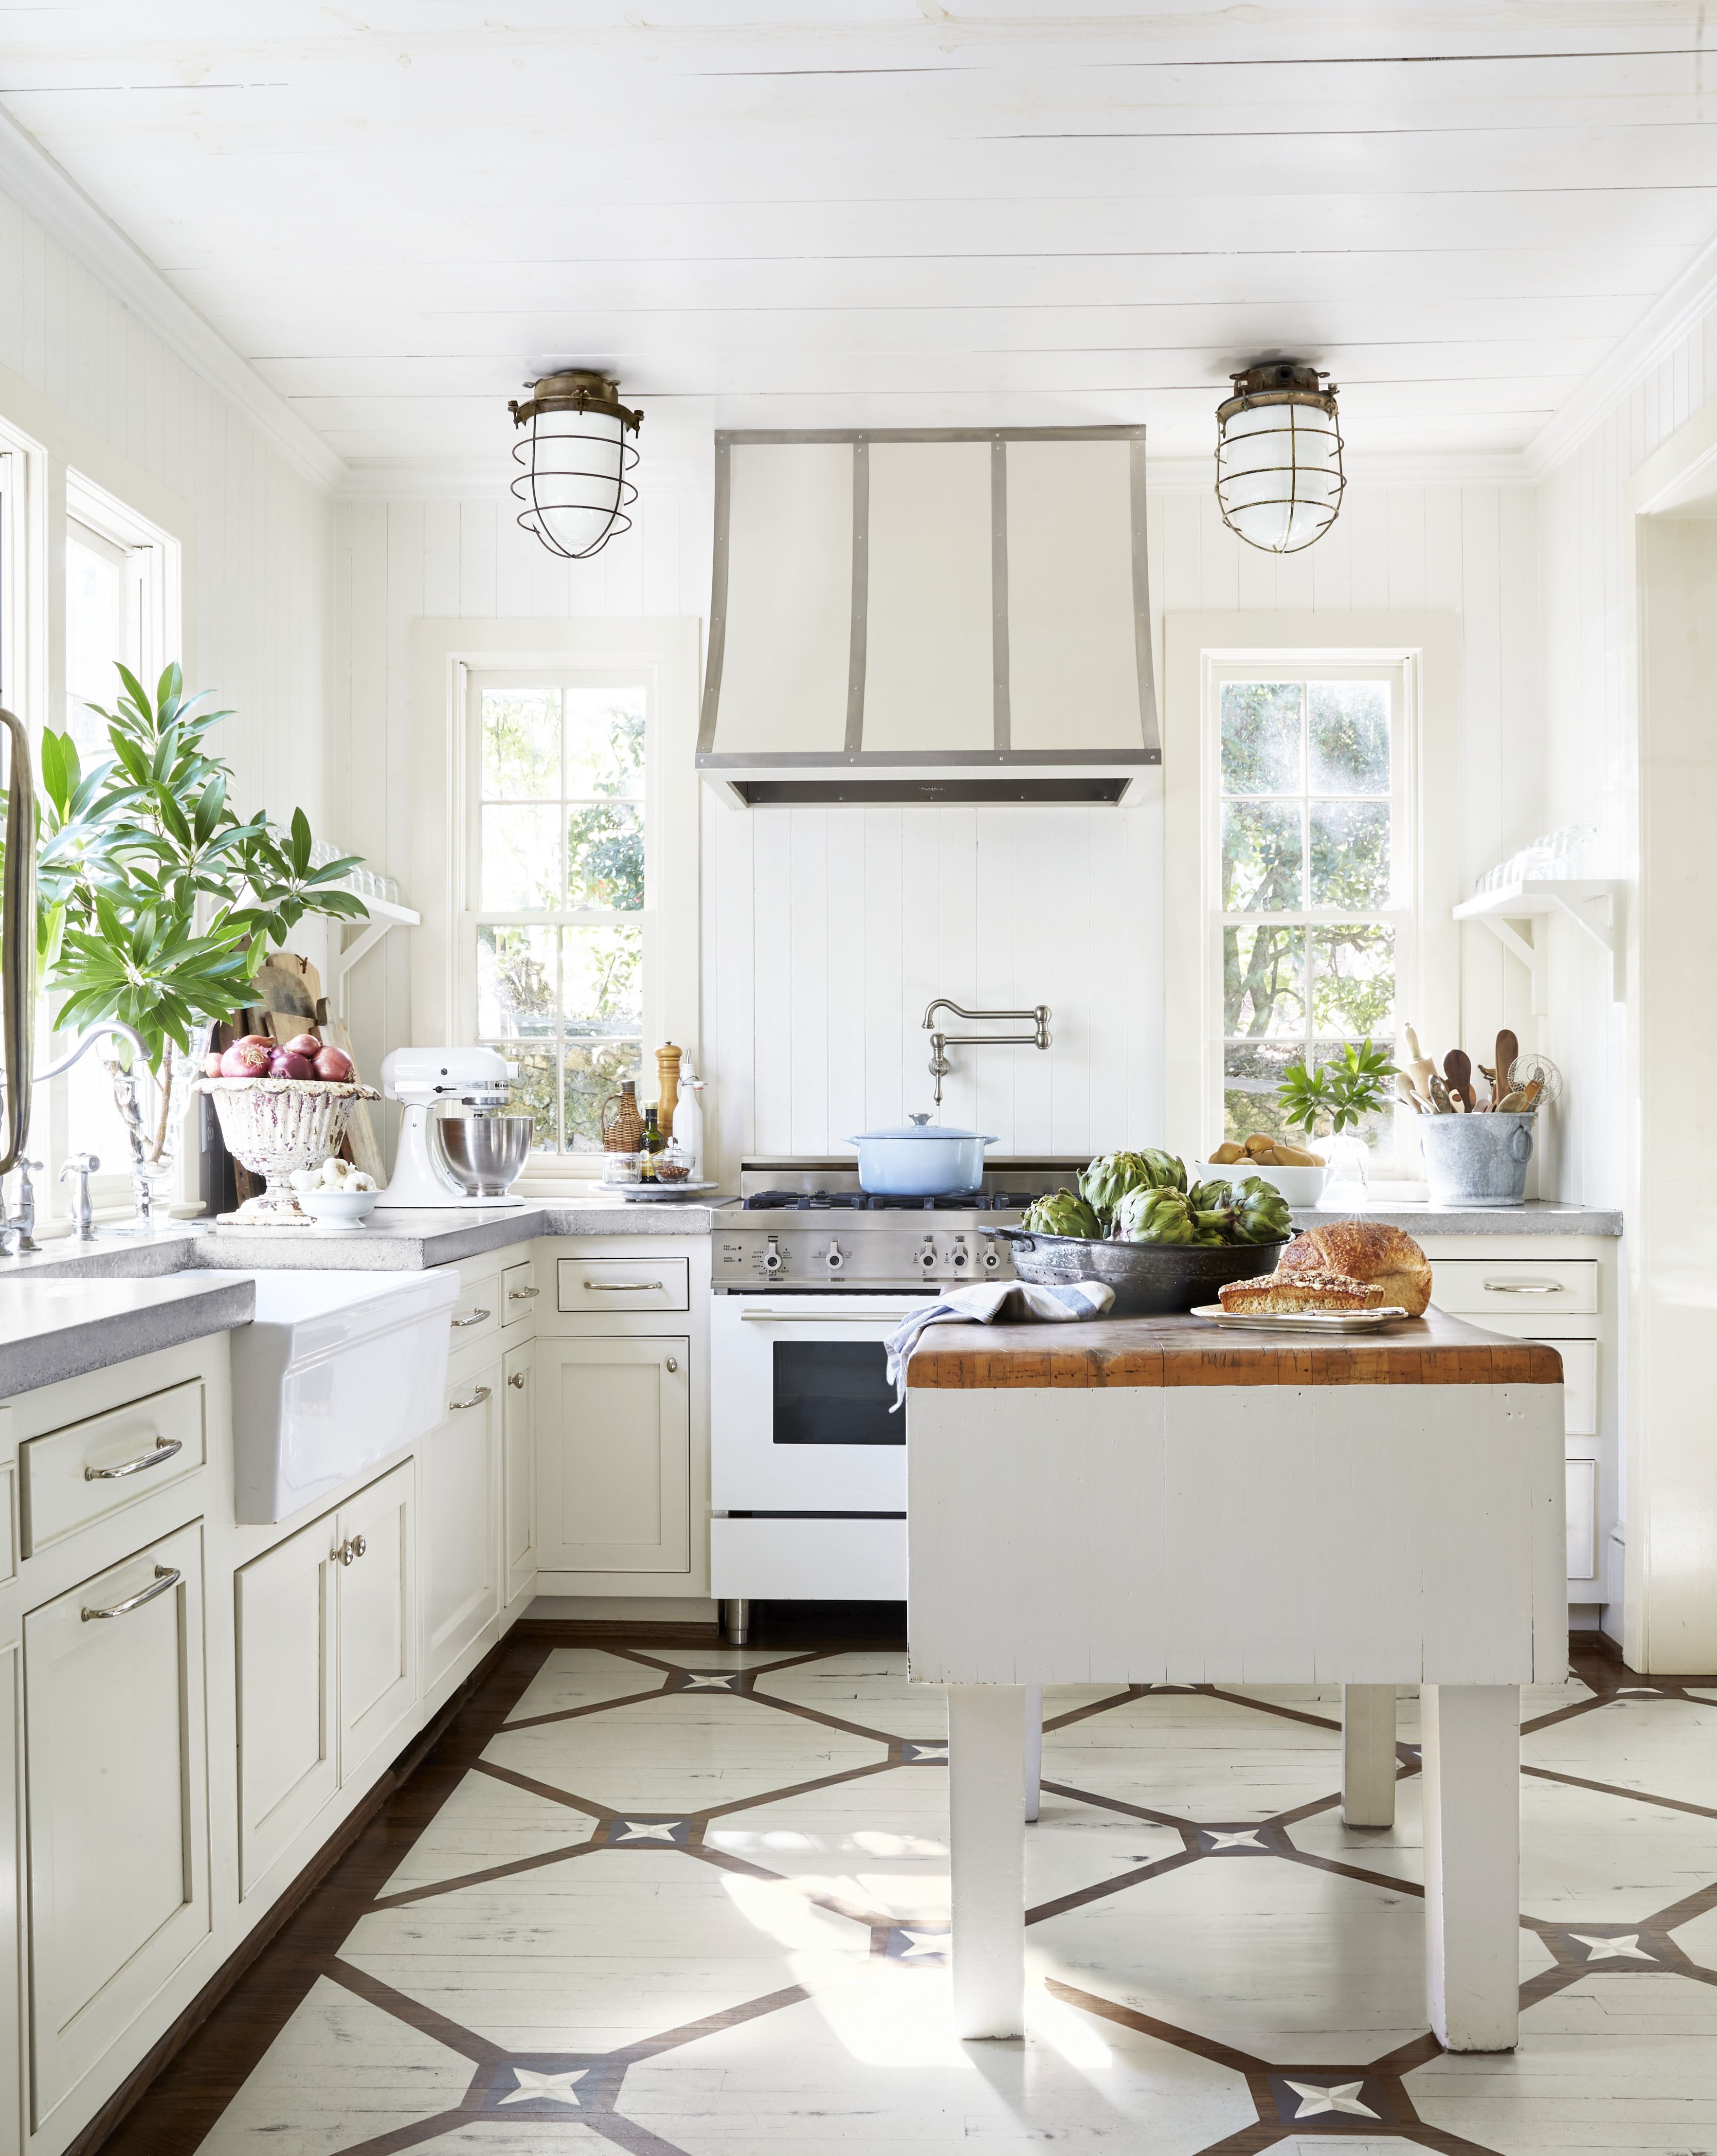 Building an All-White Kitchen